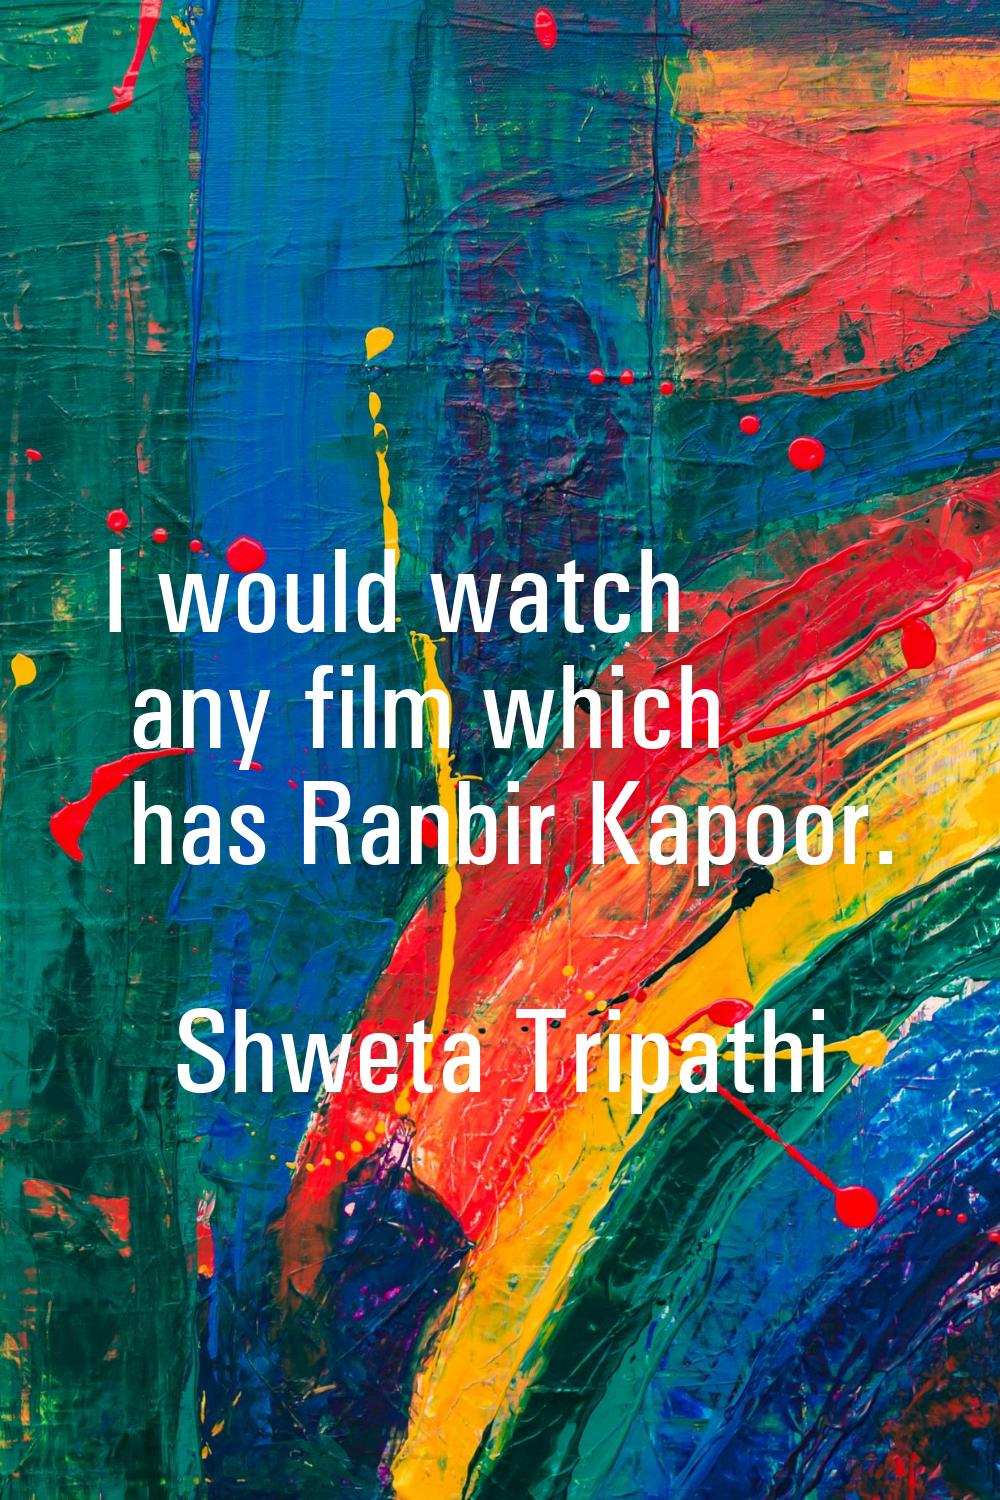 I would watch any film which has Ranbir Kapoor.